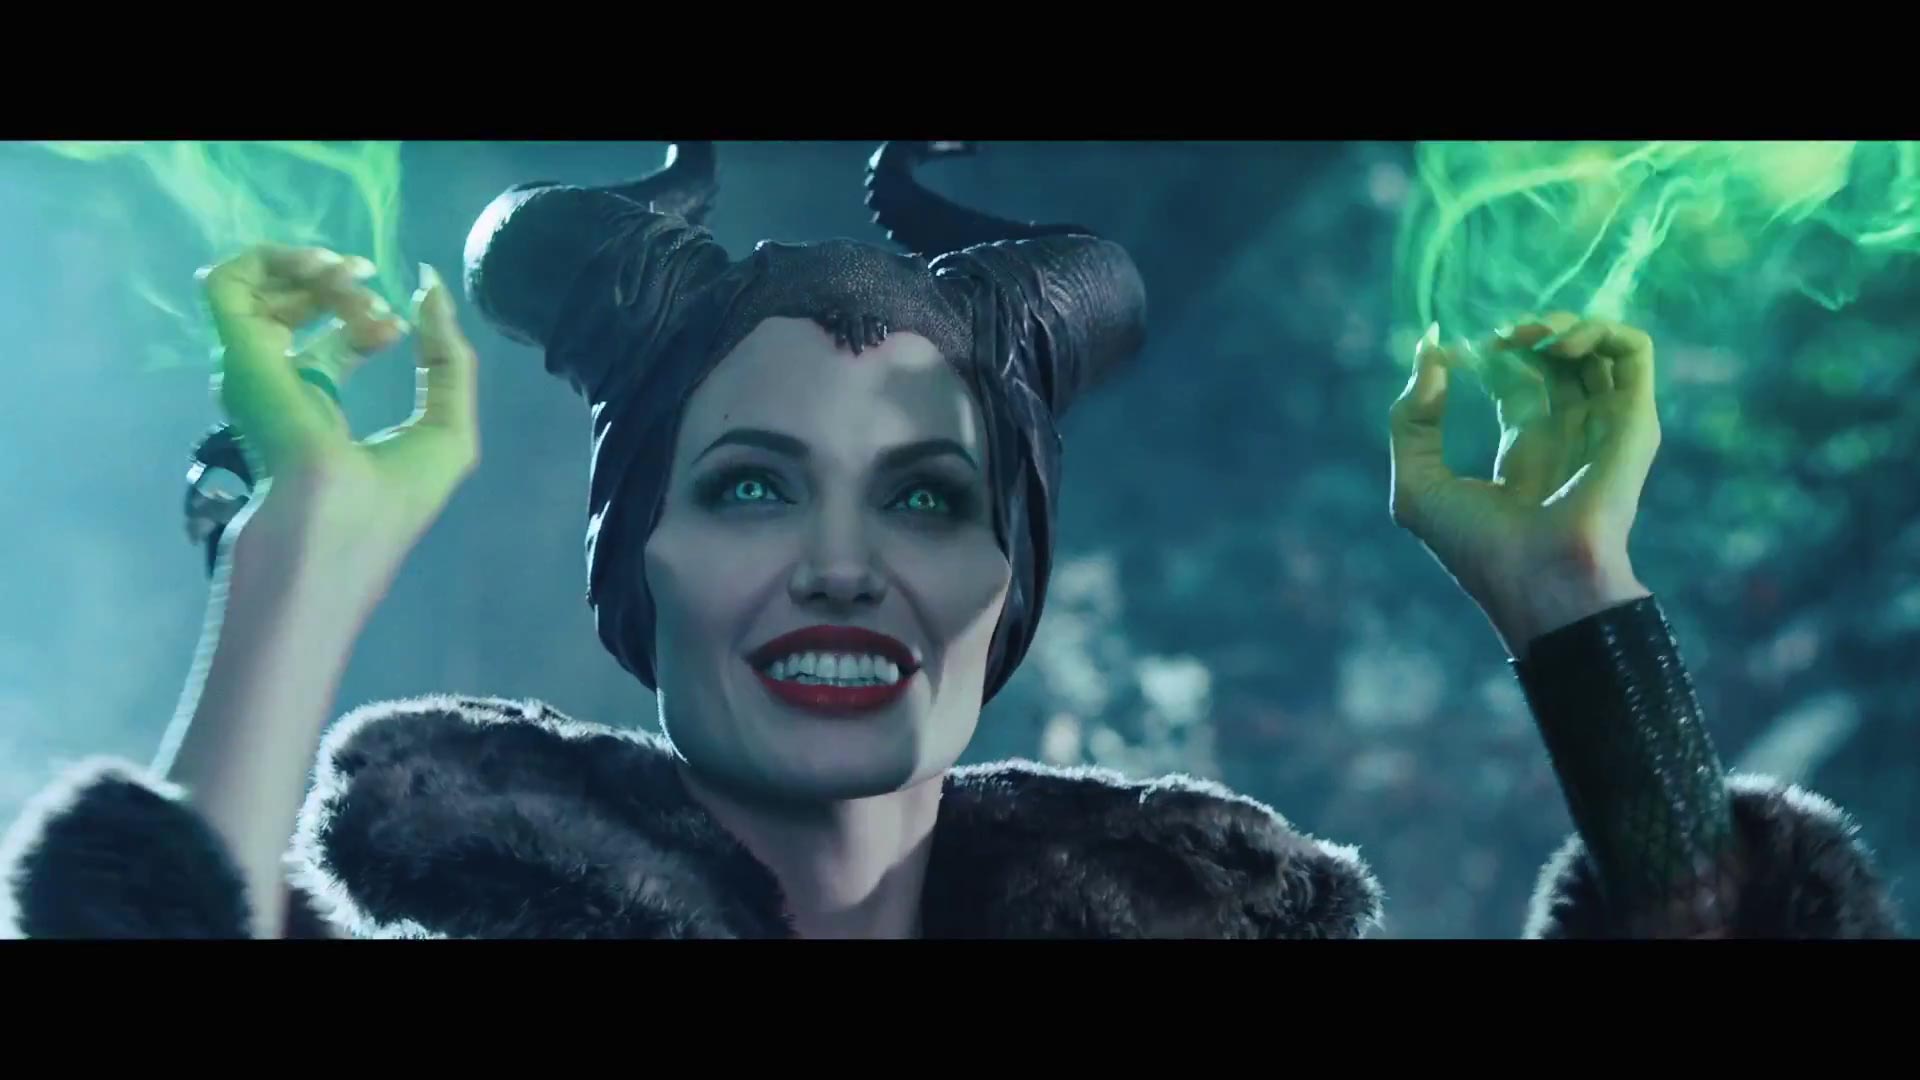 Angelina Jolie and Elle Fanning talk about the story of Sleeping Beauty and Maleficent